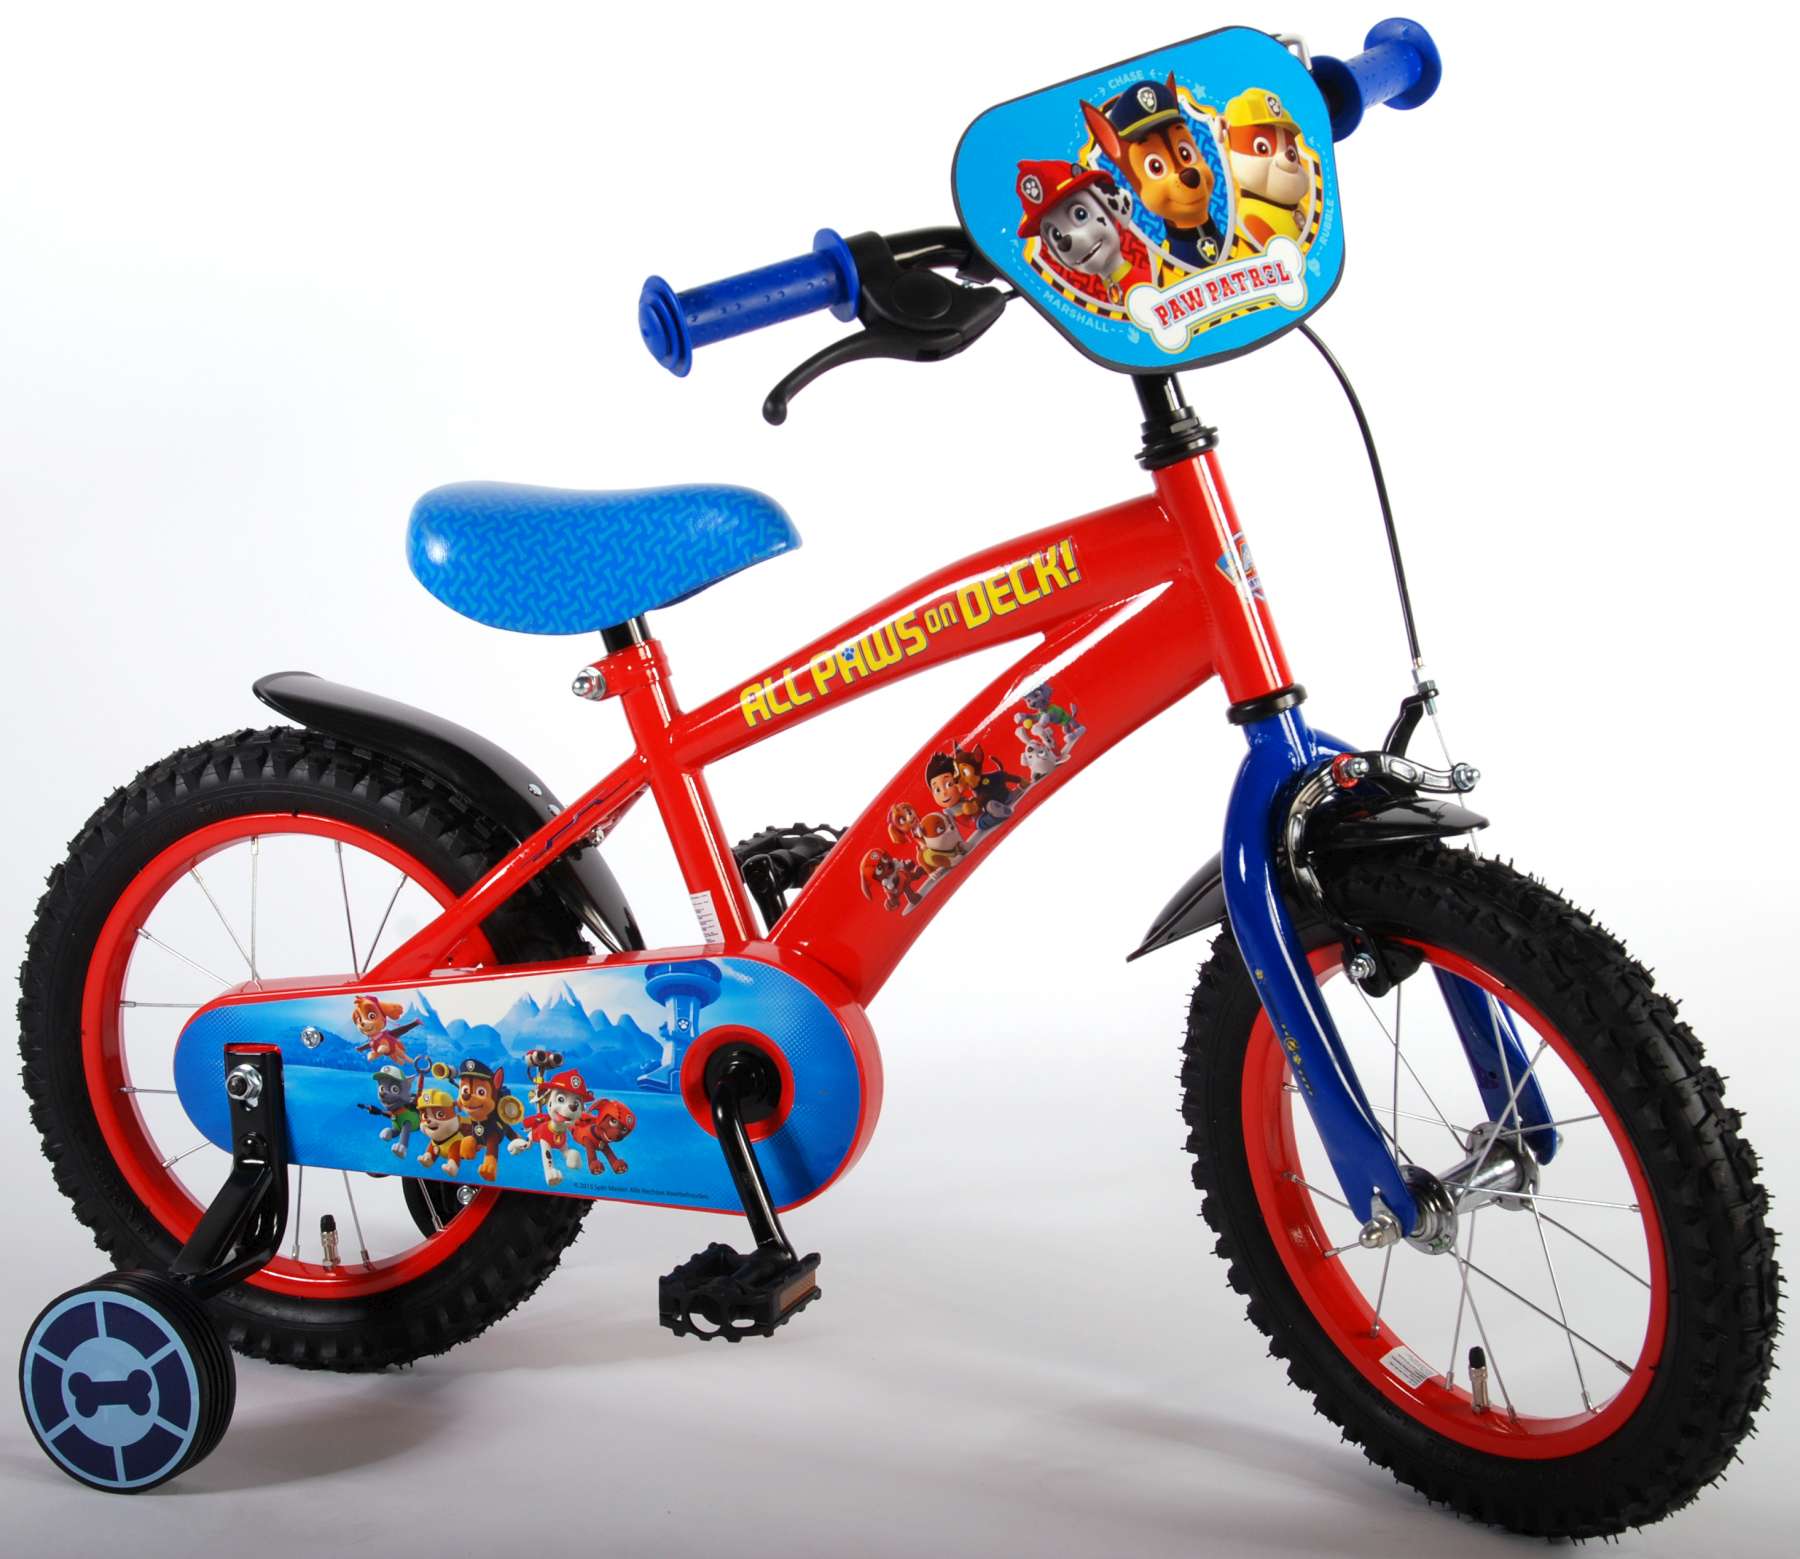 rent reference parkere 14 Paw Patrol Bike | Store www.lactando.org